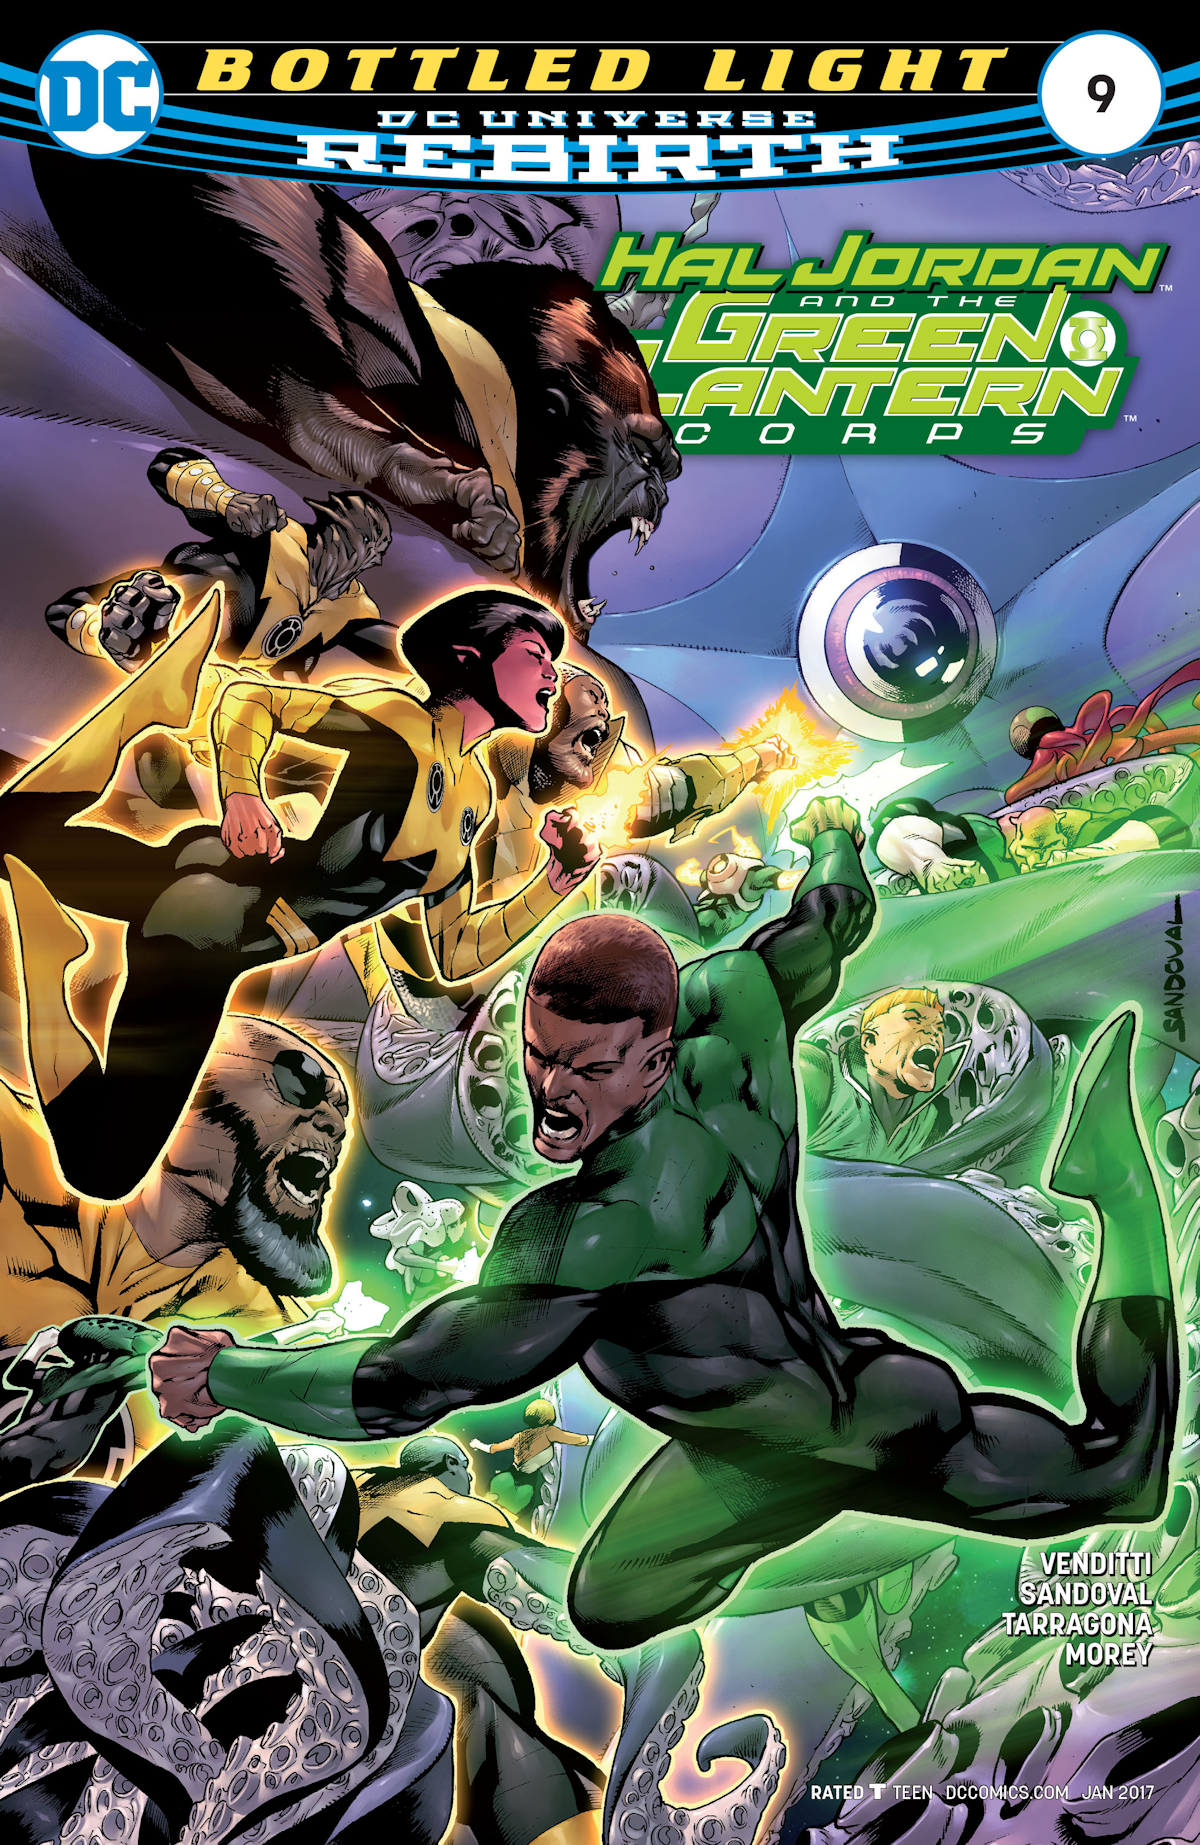 Hal Jordan and the Green Lantern Corps 9 (Cover A)